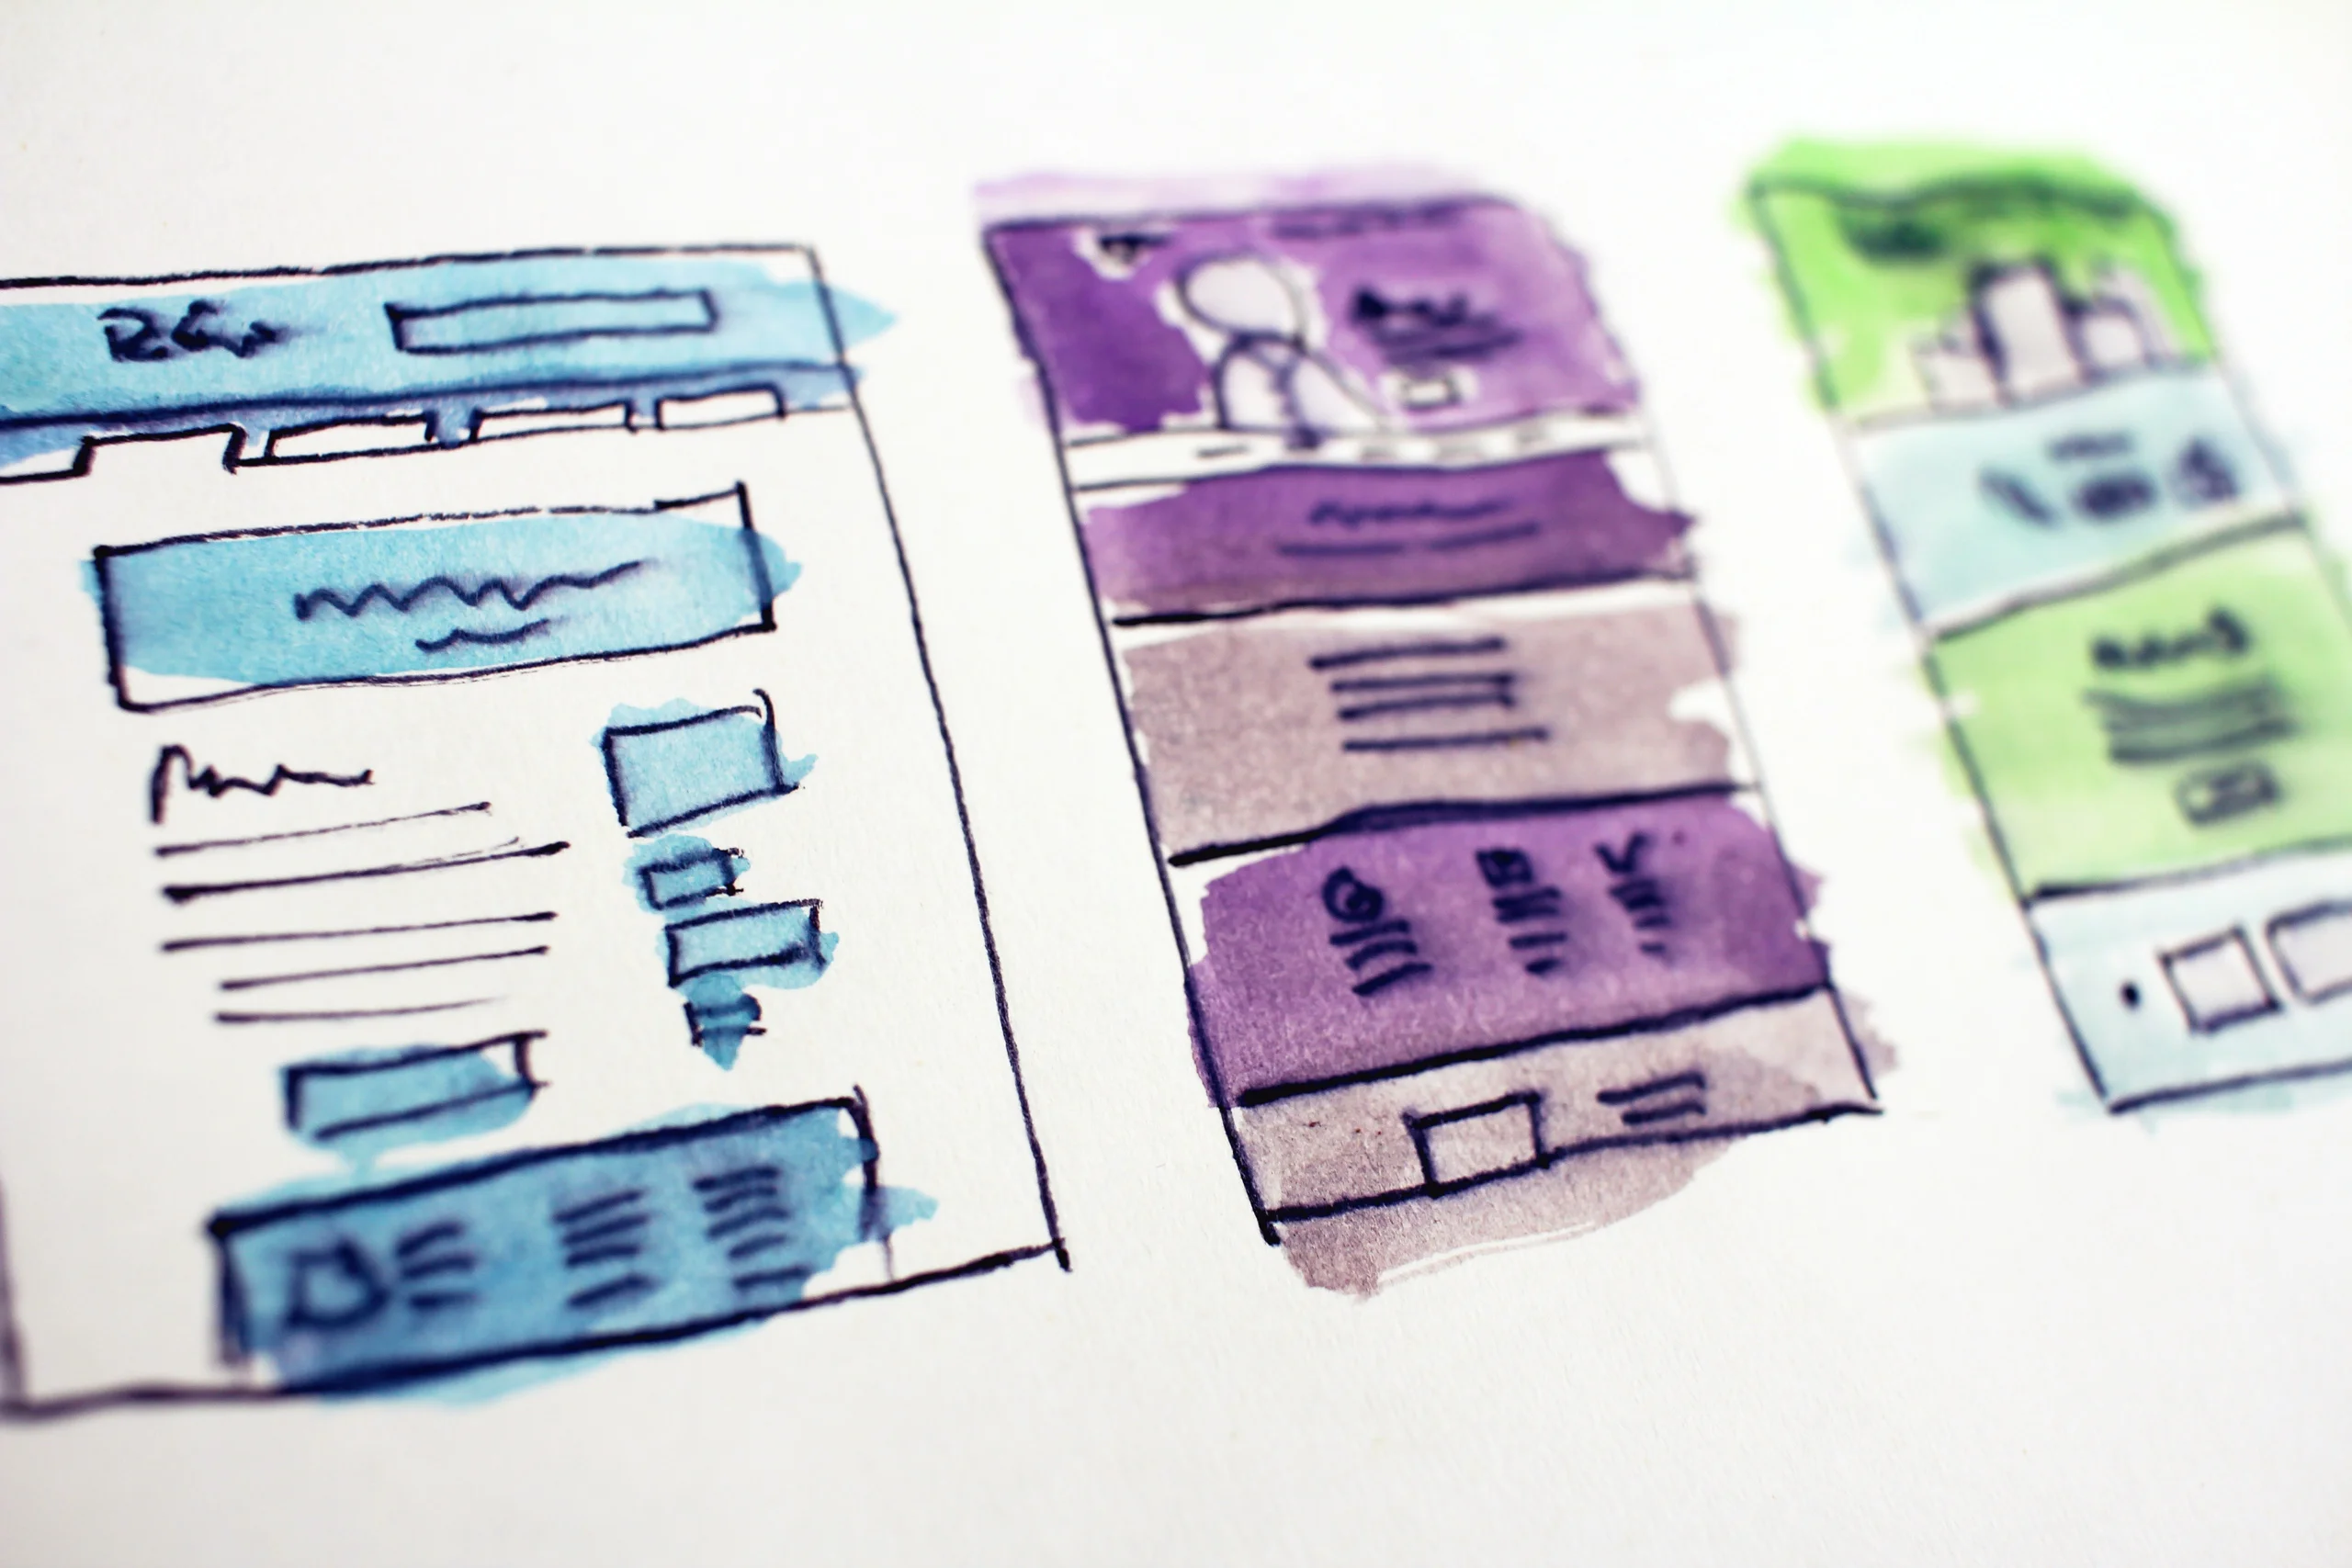 Three hand-sketched and watercolor-painted columns of website wireframes.